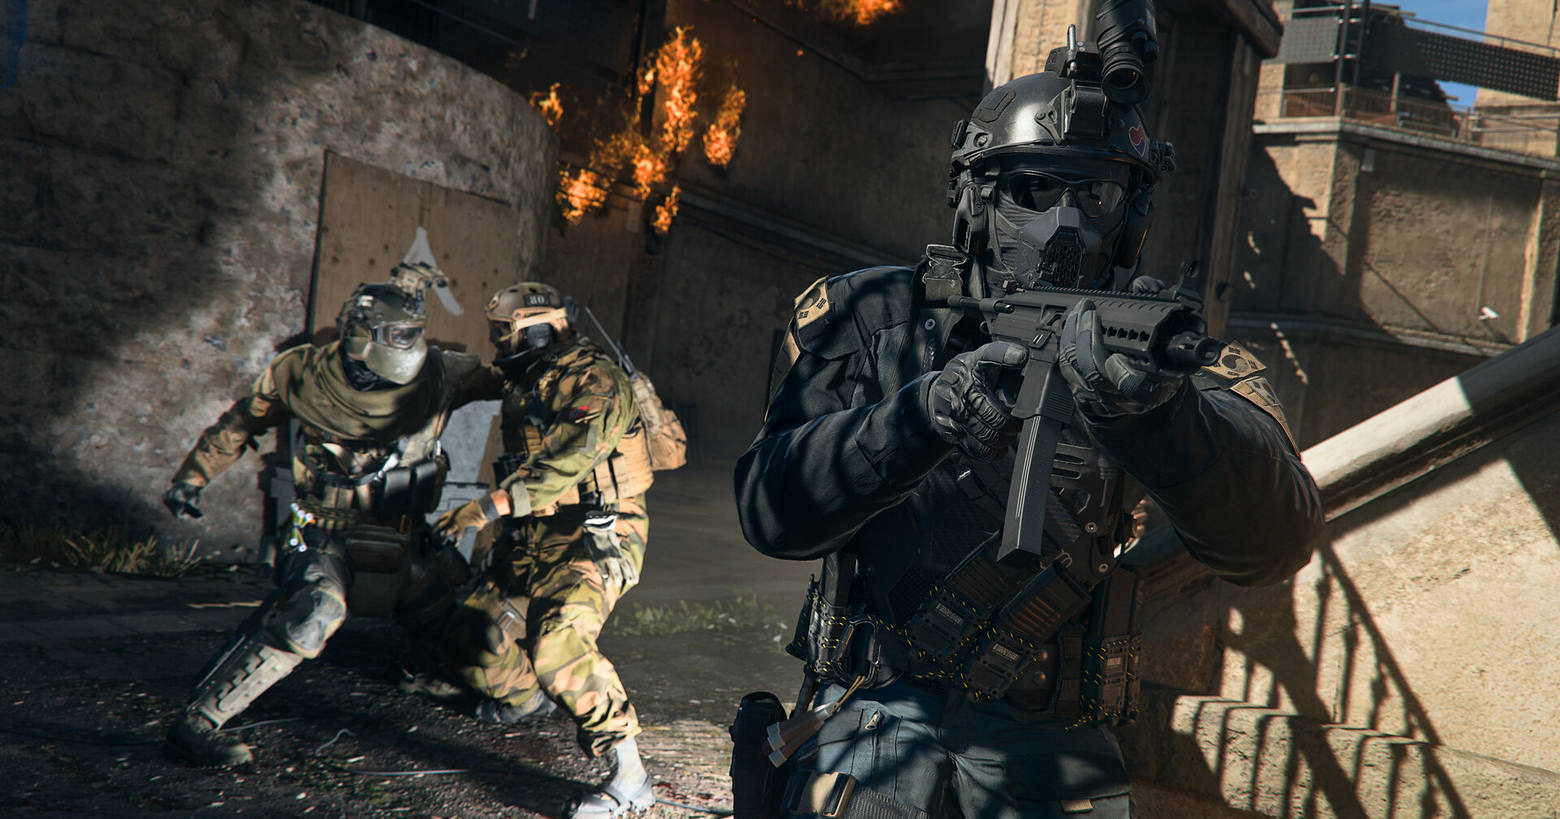 An armed soldier in a black uniform from Warzone Season 2 walks in our direction, while in the background two soldiers are in close combat.